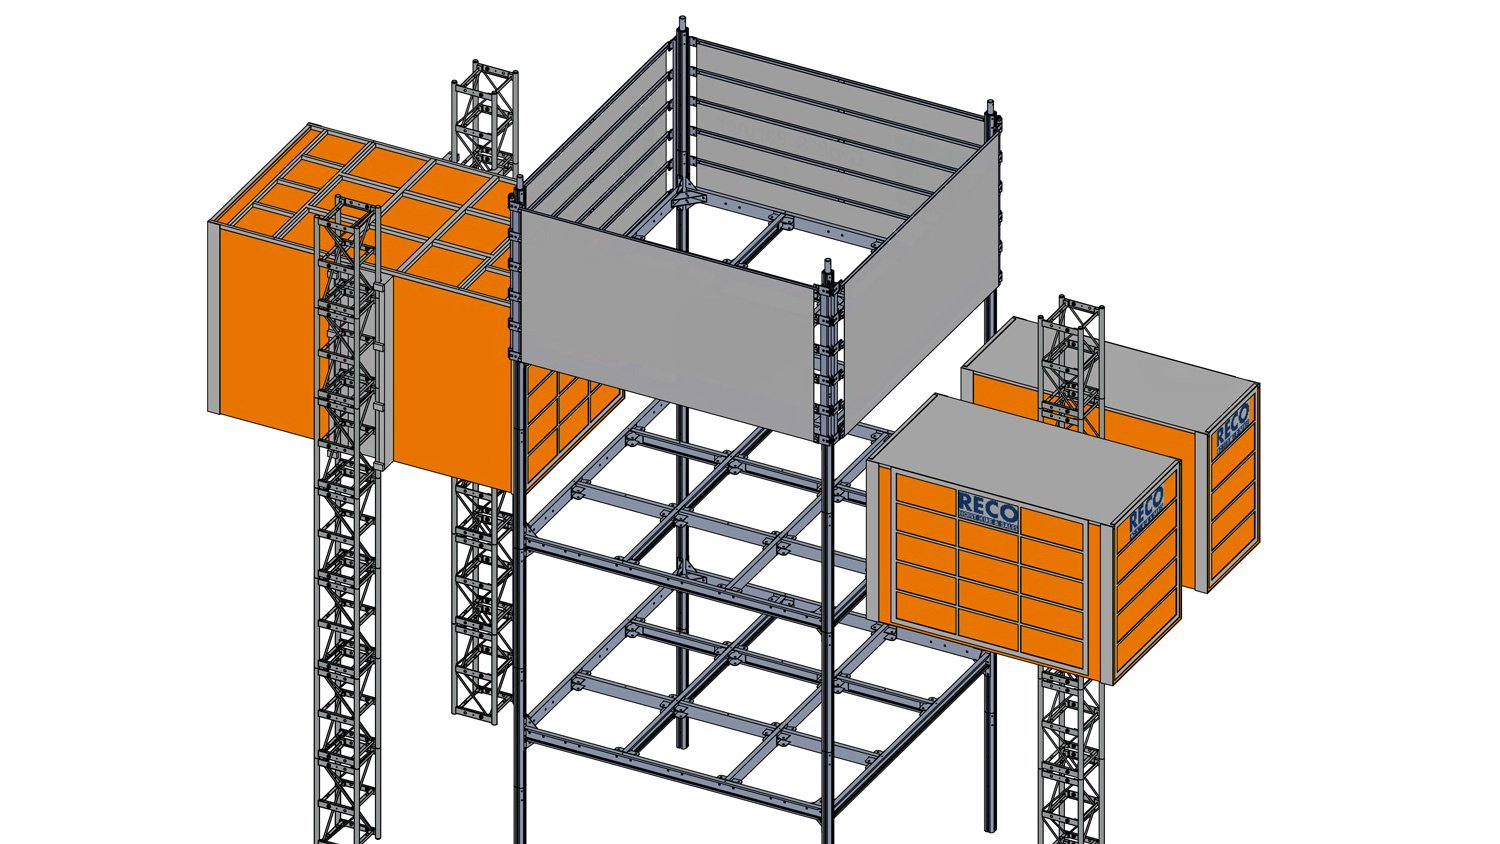 A 3D illustration of a RECO Common Tower with Alimak twin hoists and a Stros Mammoth passenger hoist